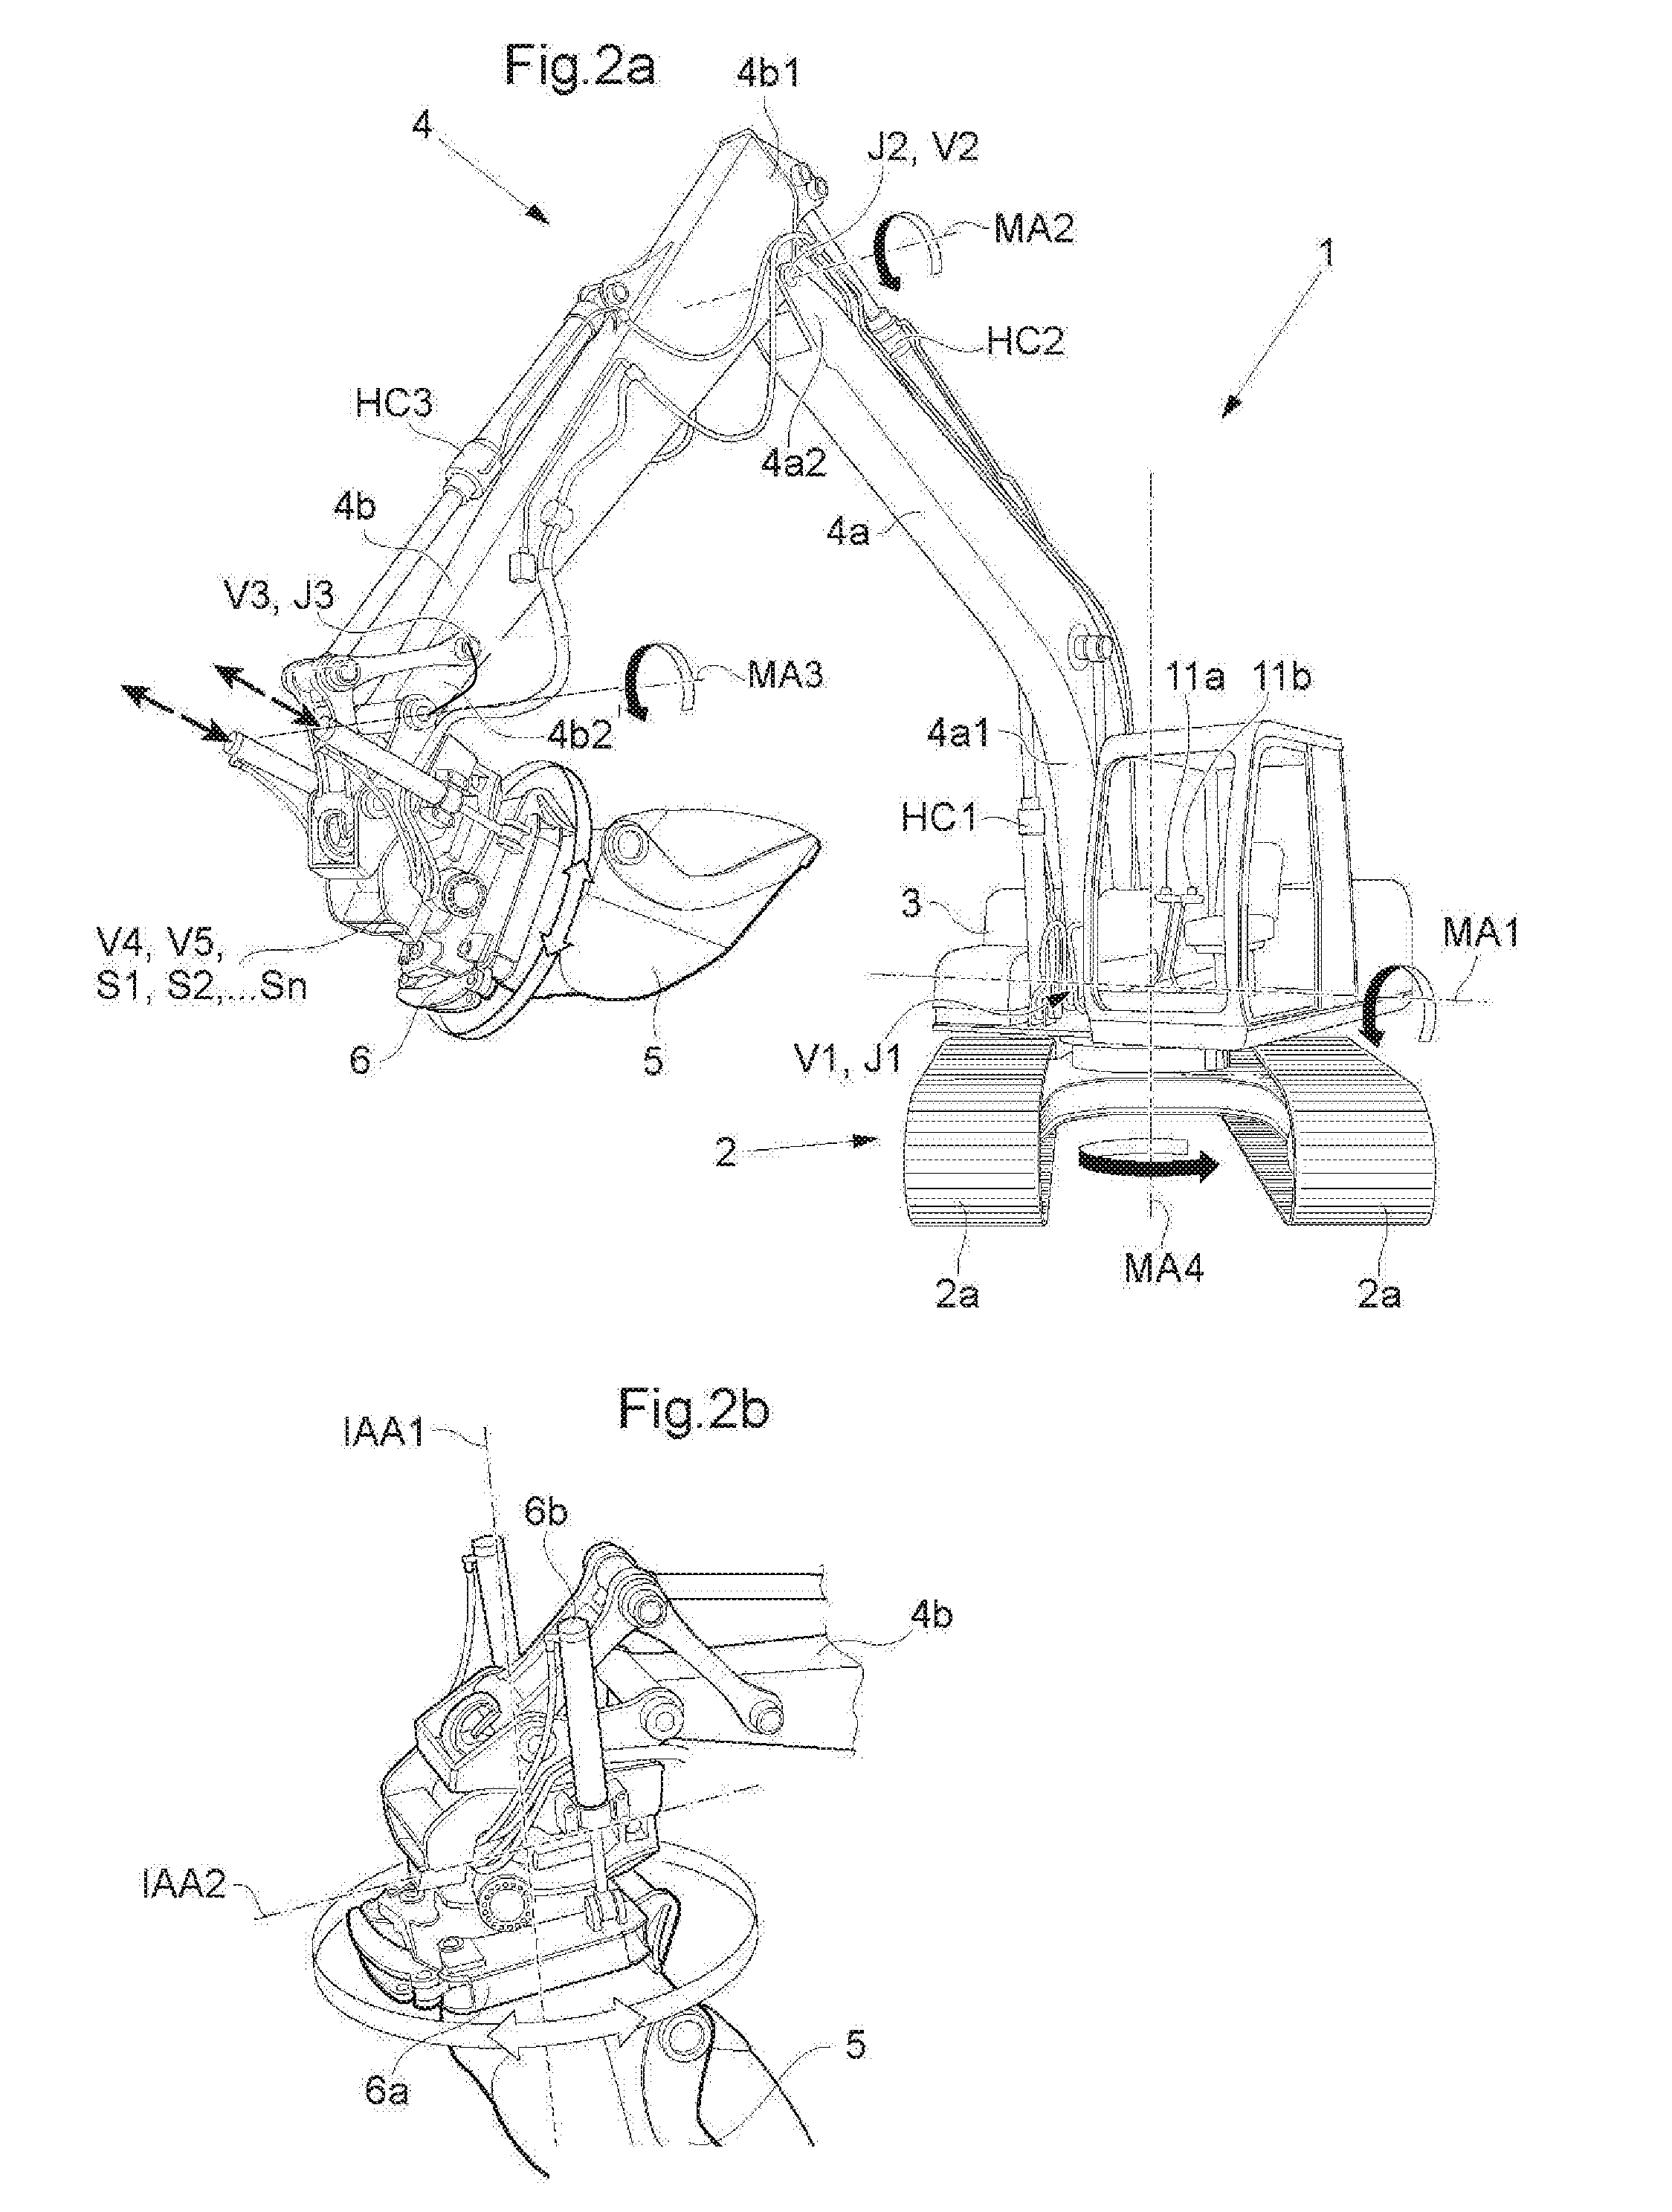 System and methods for with a first and a second hand operated control, controlling motion on a work tool for a construction machine